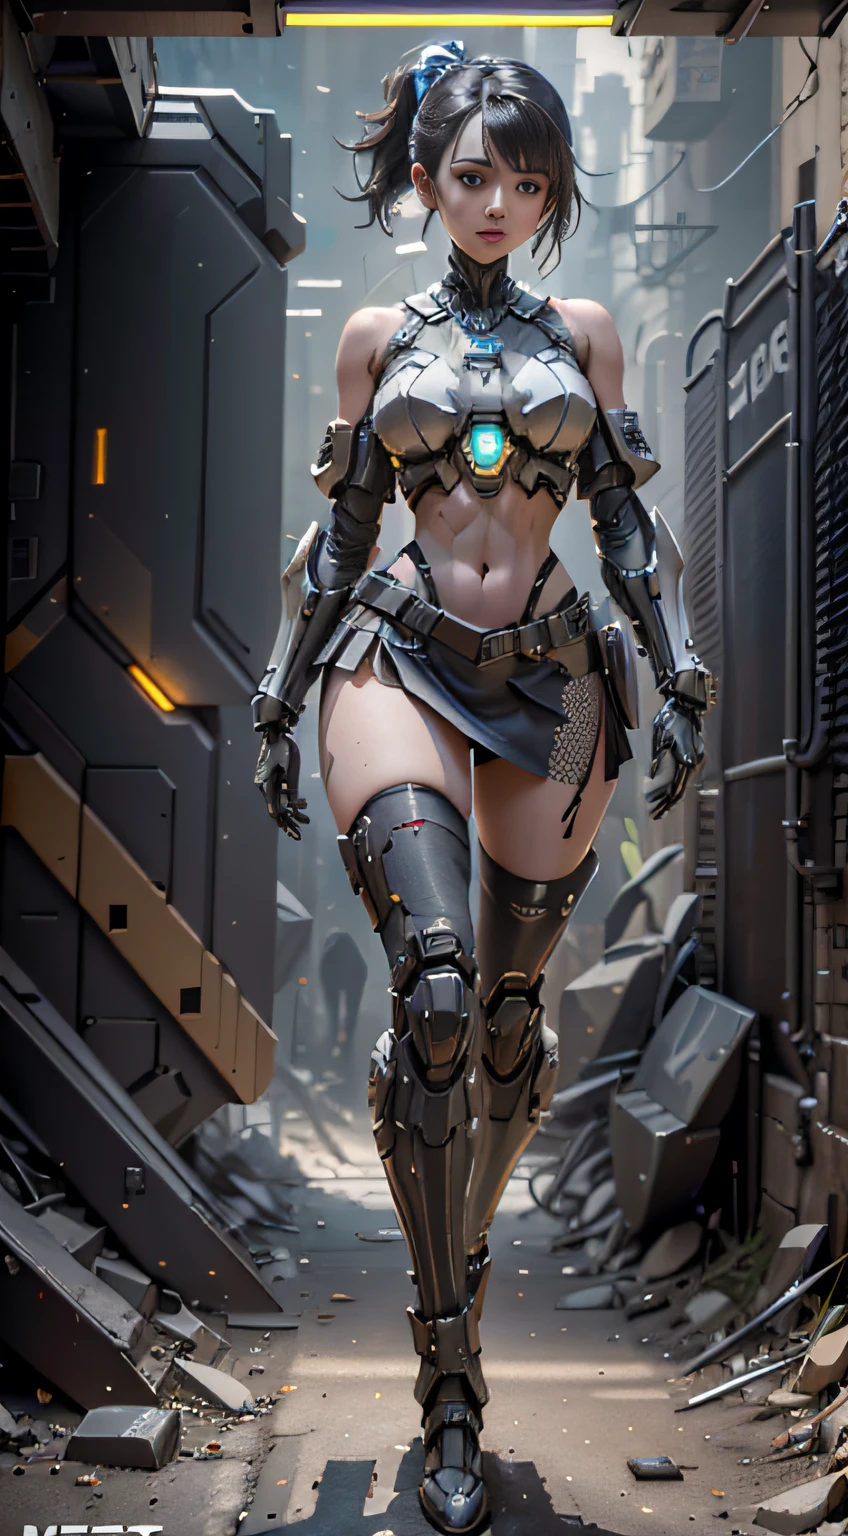 （（best qualtiy））， （（tmasterpiece））， （The is very detailed：1.3）， sci-fi mech， Beautiful cyberpunk woman wearing mech，Bare with thighs，Wear mecha-style boots，Bare shoulders and upper armecha-style gloves，Bare abdomen and navel，pleatedskirt，lean legs，Carry a weapon，Wear black stockings，Broken stockings， hdr（HighDynamicRange）， Ray traching， NVIDIA RTX， Hyper-Resolution， Unreal 5， sub surface scattering， PBR Texture， post-proces， Anisotropic filtering， depth of fields， Maximum clarity and sharpness， Many-Layer Textures， Albedo e mapas Speculares， Surface coloring，Accurately simulate light-material interactions，perfectly proportions，rendering by octane，twotonelighting，Low ISO，White balance，trichotomy，Wide aperture，8K raw data，High-Efficiency Sub-Pixel，sub-pixel convolution，Luminous Particle，Light scattering，Tyndall effect